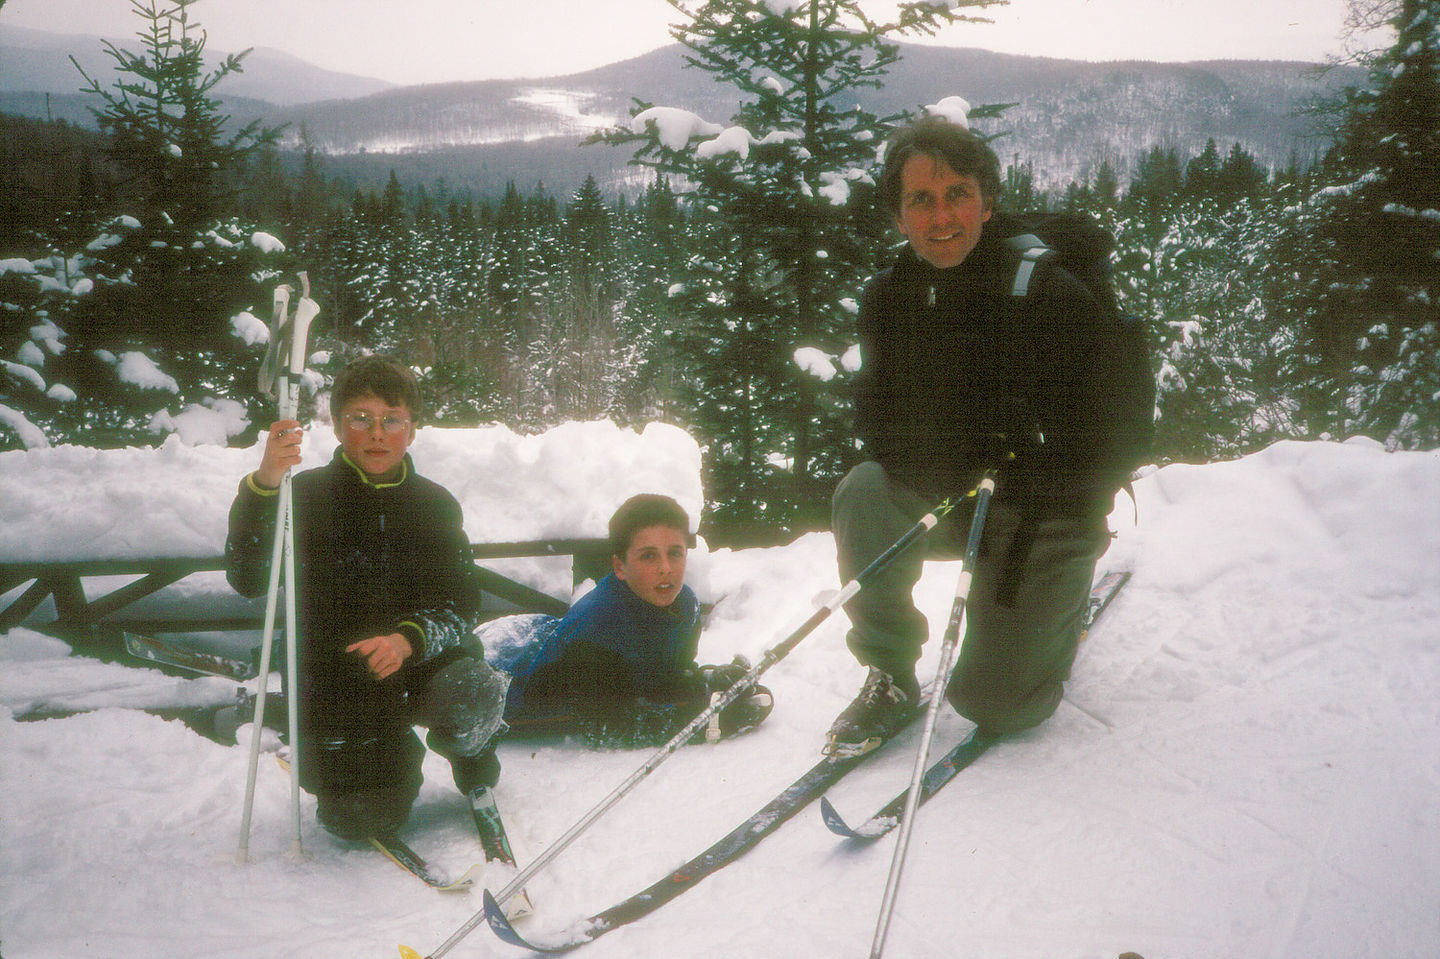 Herb and boys skiing